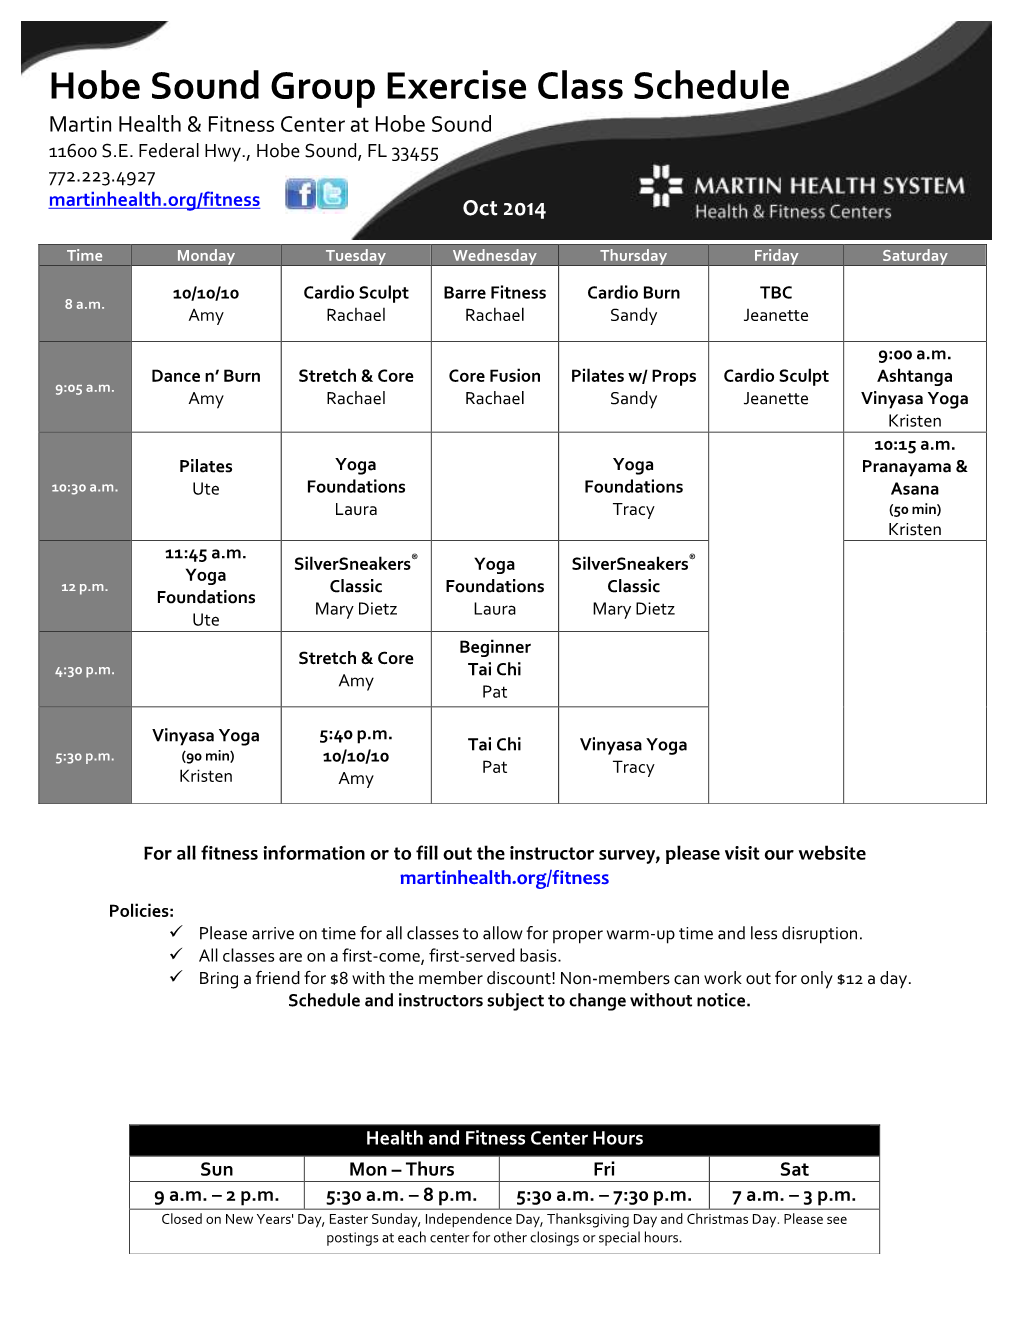 Exercise Class Schedule Martin Health & Fitness Center at Hobe Sound 11600 S.E